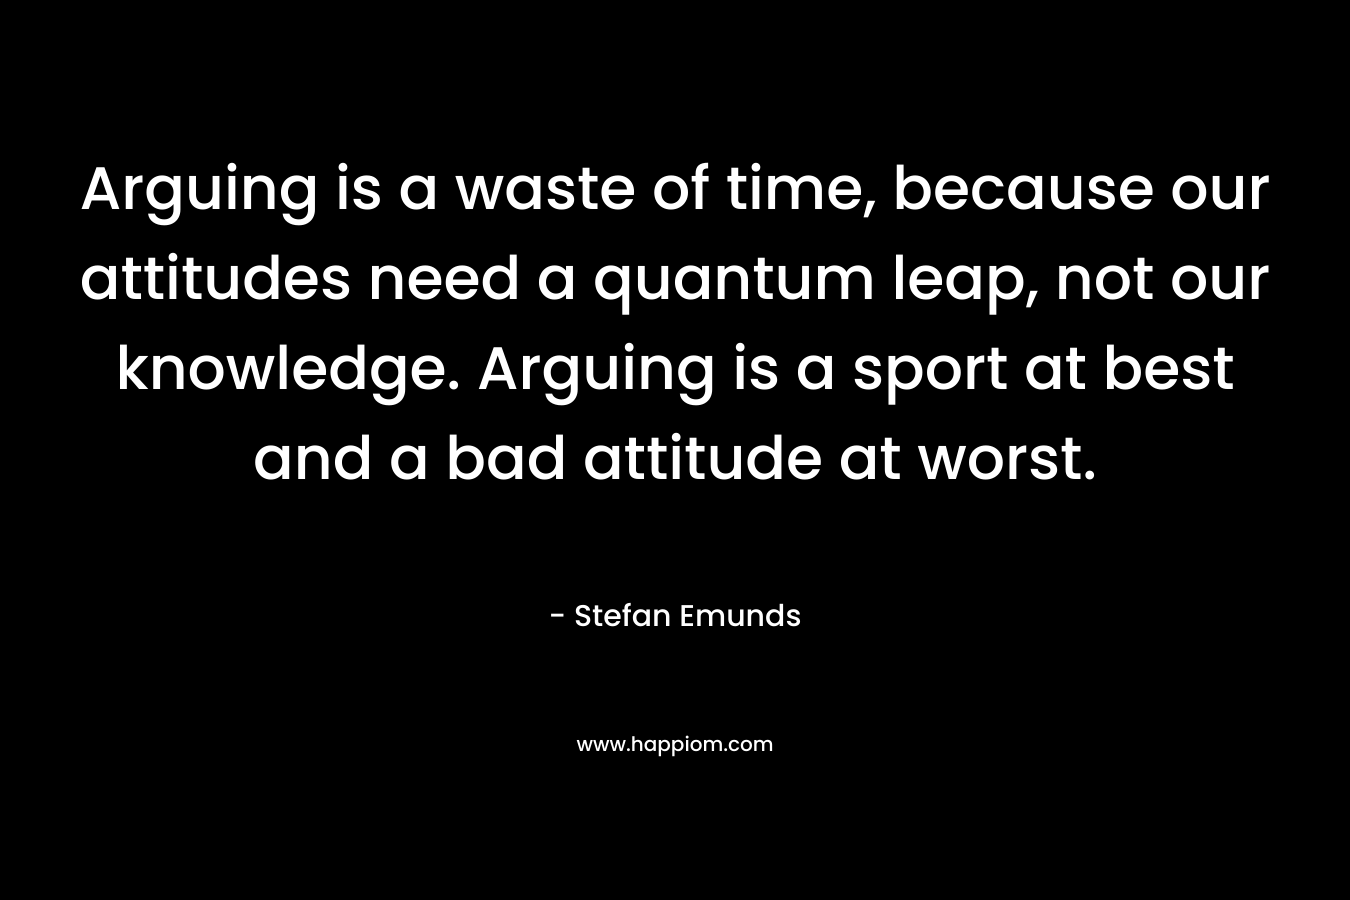 Arguing is a waste of time, because our attitudes need a quantum leap, not our knowledge. Arguing is a sport at best and a bad attitude at worst.